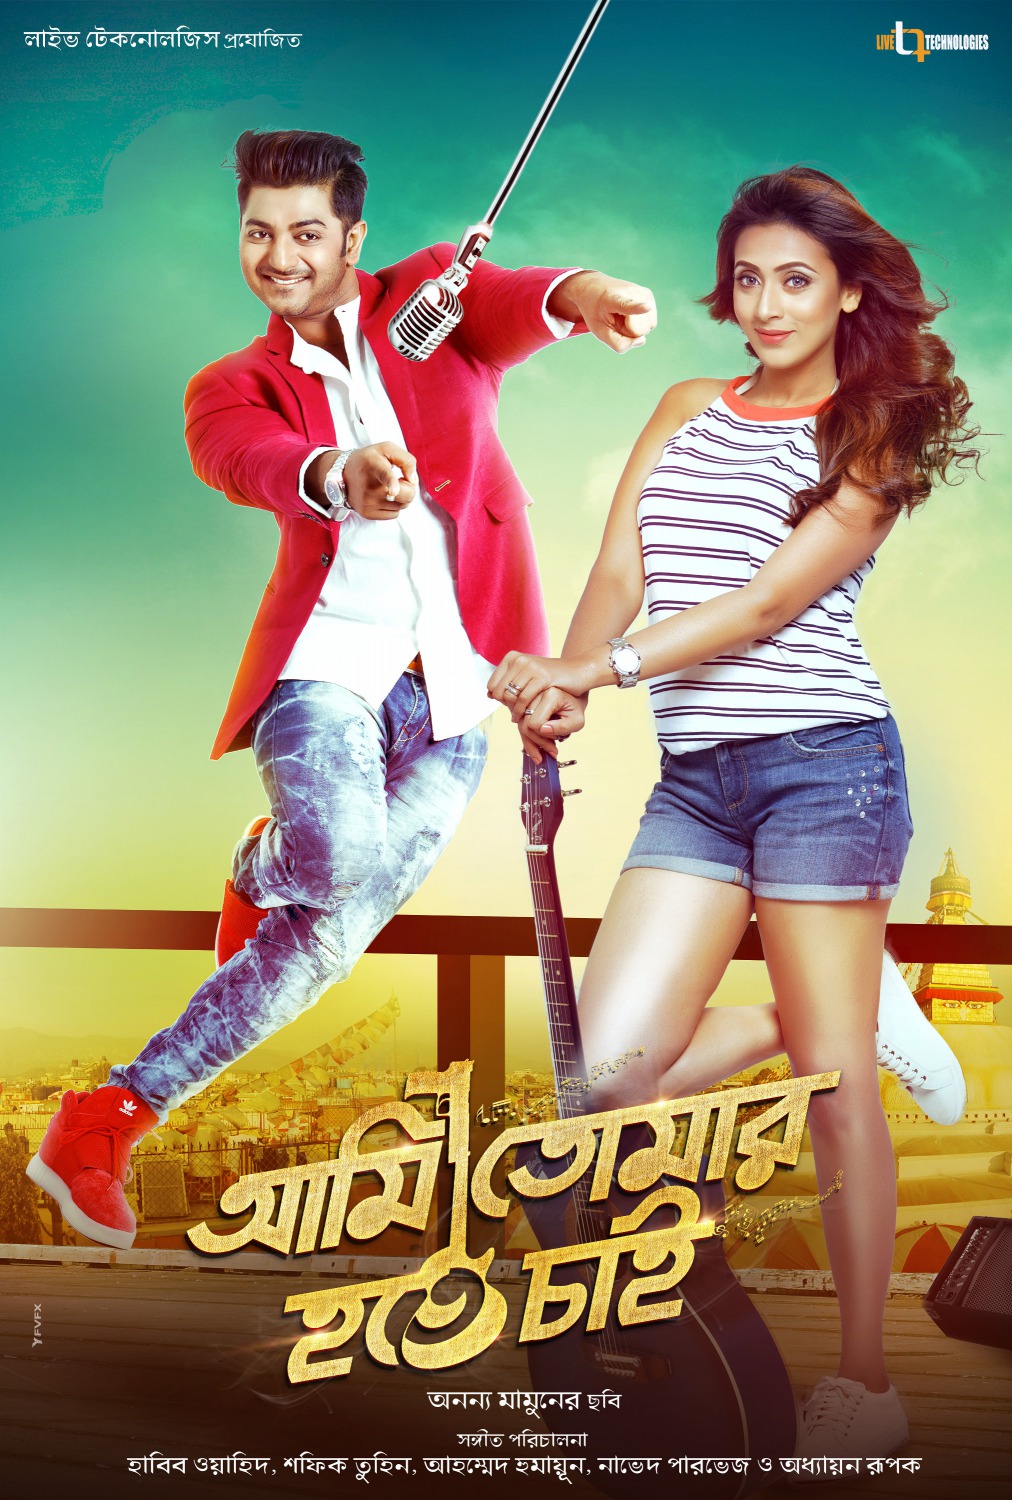 Extra Large Movie Poster Image for Ami Tomar Hote Chai (#7 of 11)